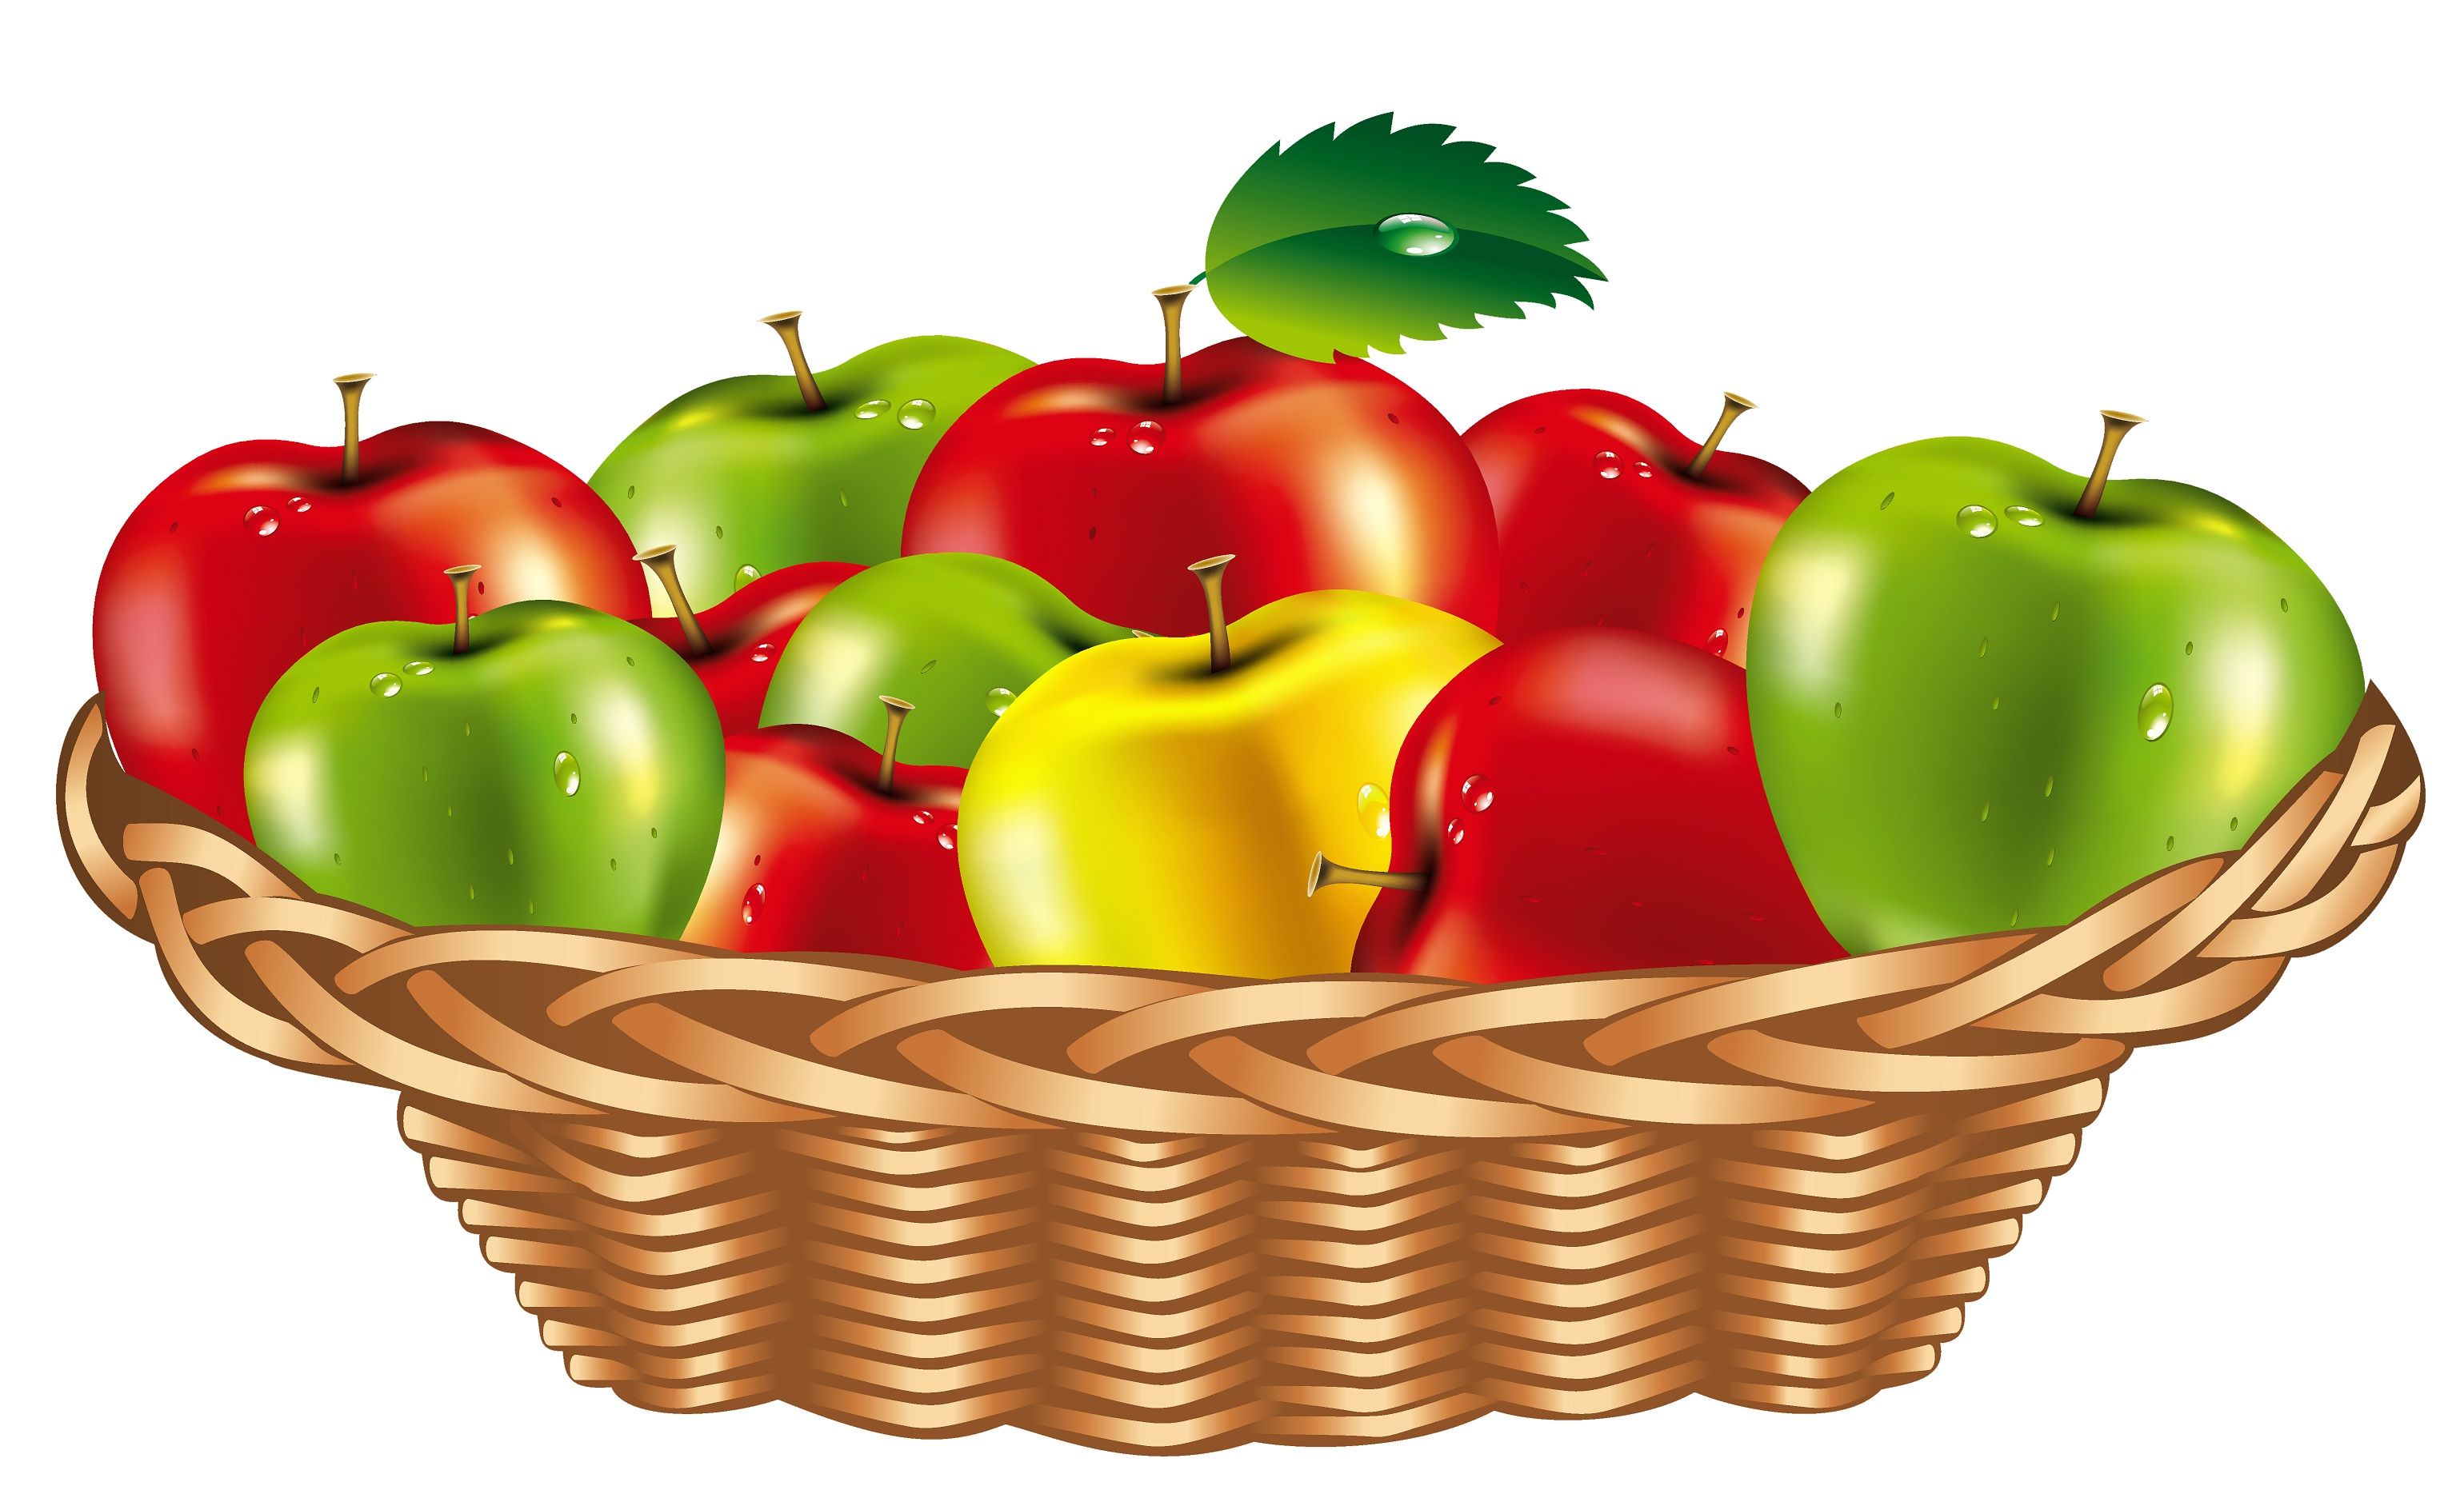 A giant fruitbowl clipart clipart images gallery for free.